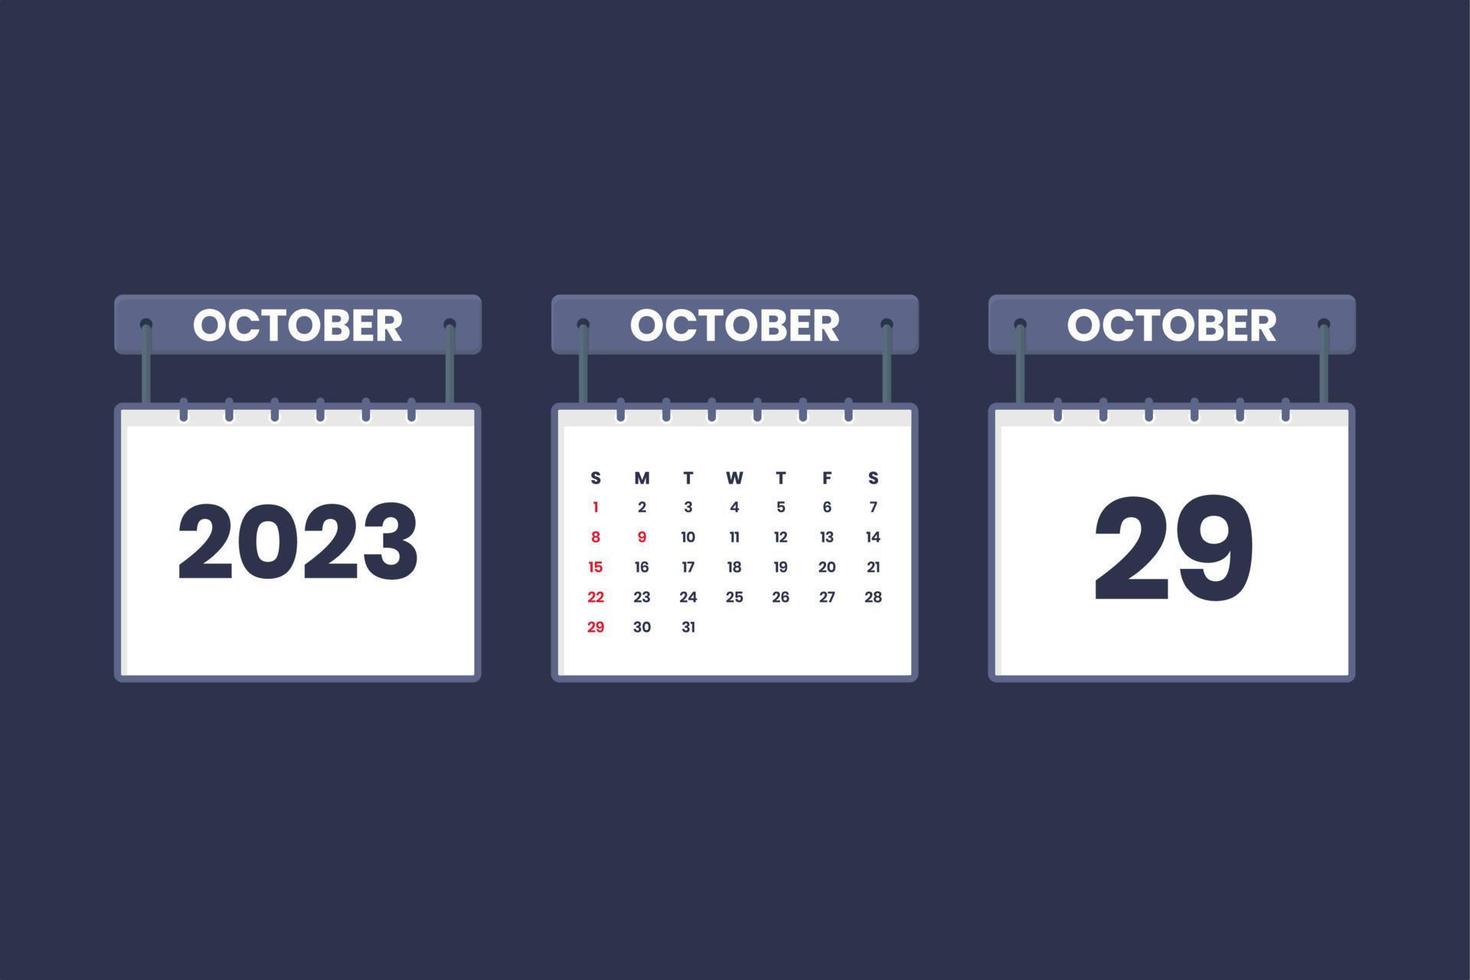 29 October 2023 calendar icon for schedule, appointment, important date concept vector